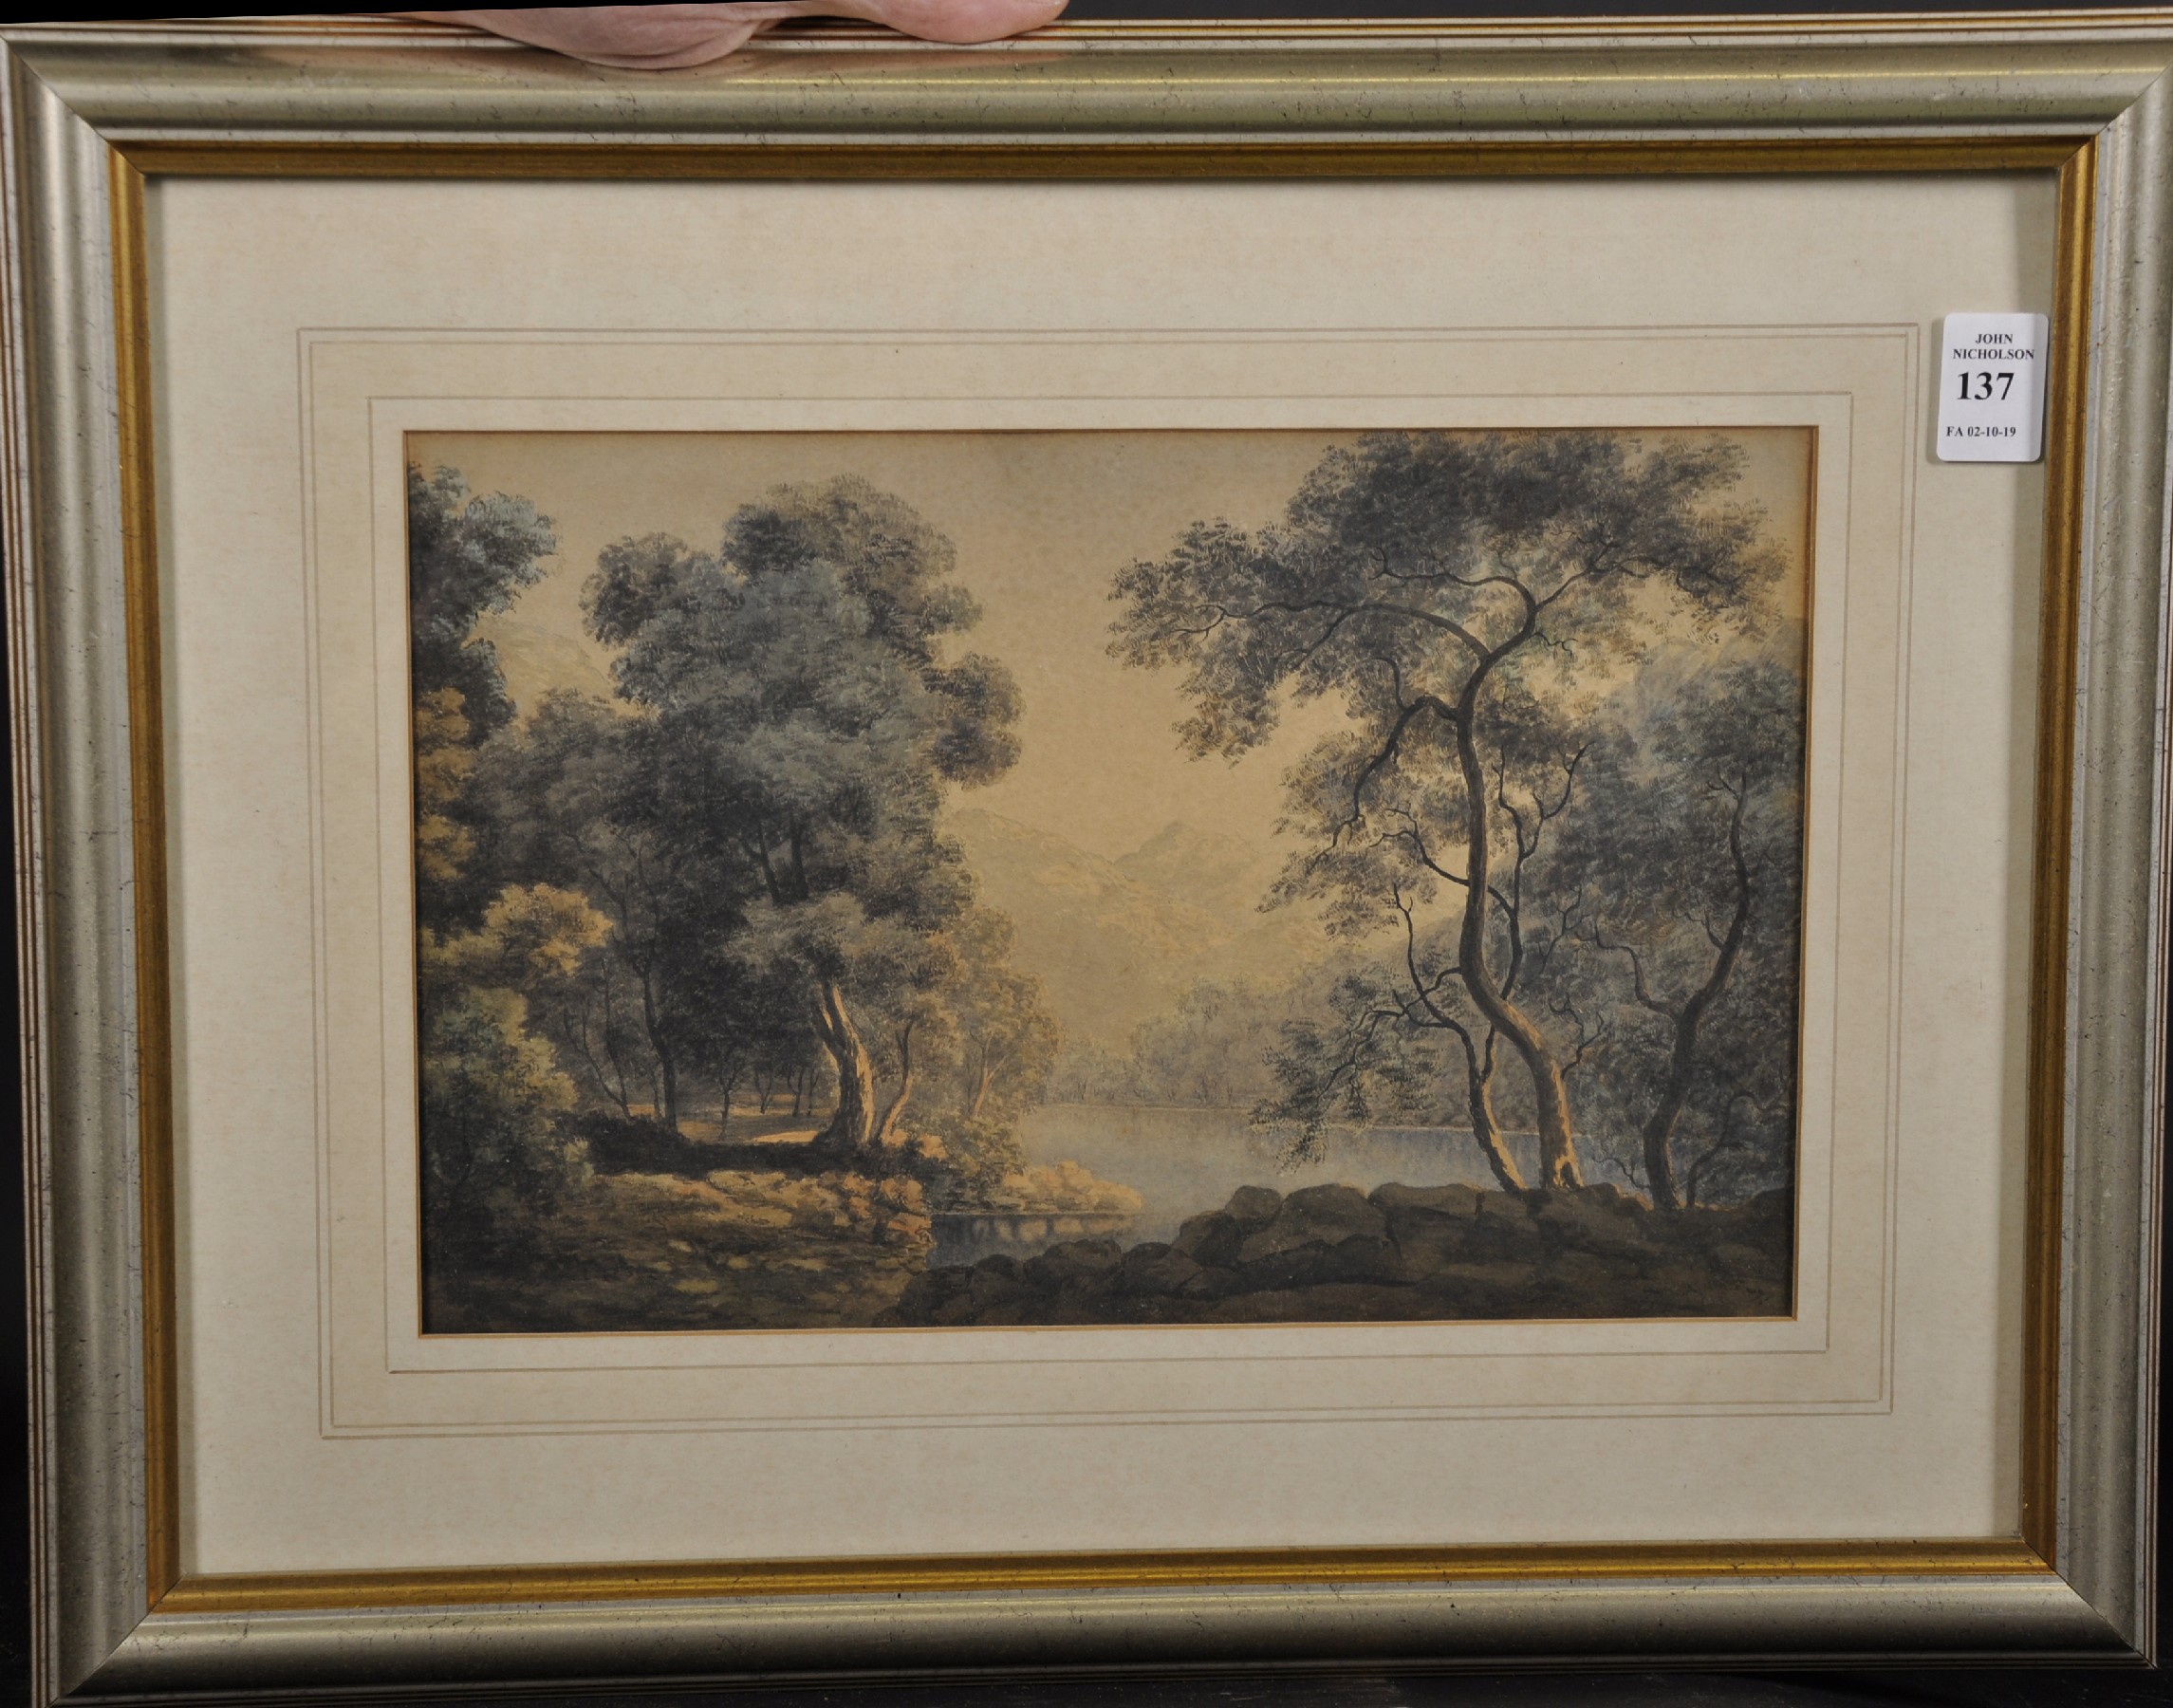 Circle of John Glover (1767-1849) British. A River Landscape, Watercolour, 7.75" x 11.75". - Image 2 of 3